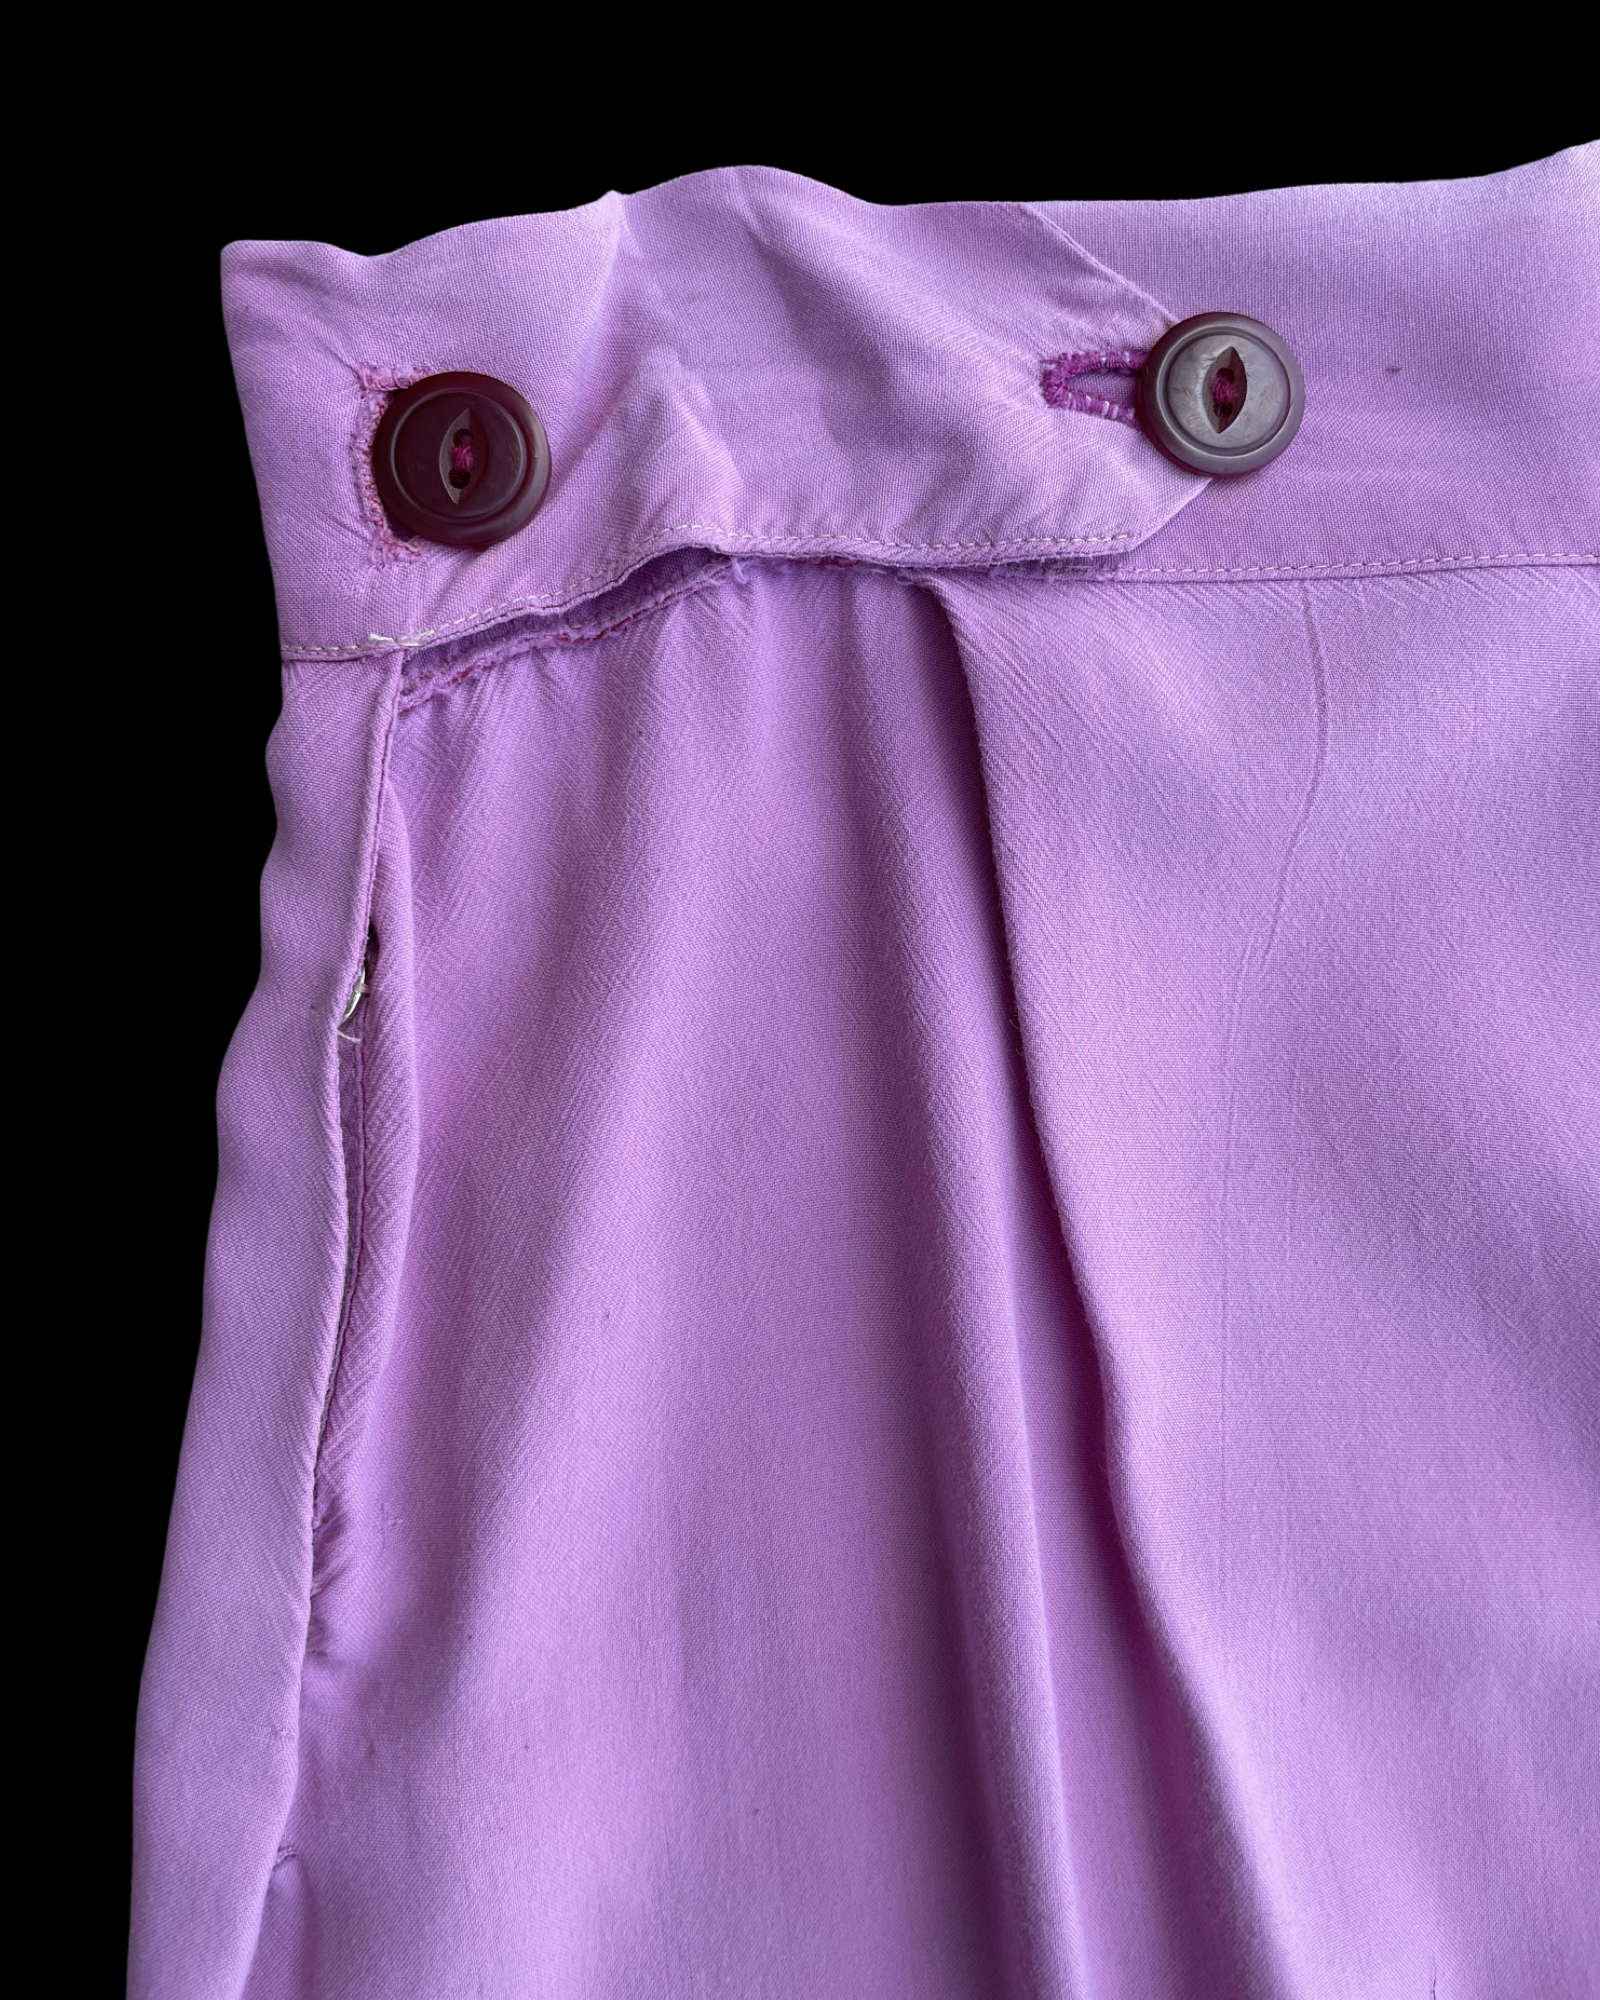 1940s Lilac Side Button Homemade Pants